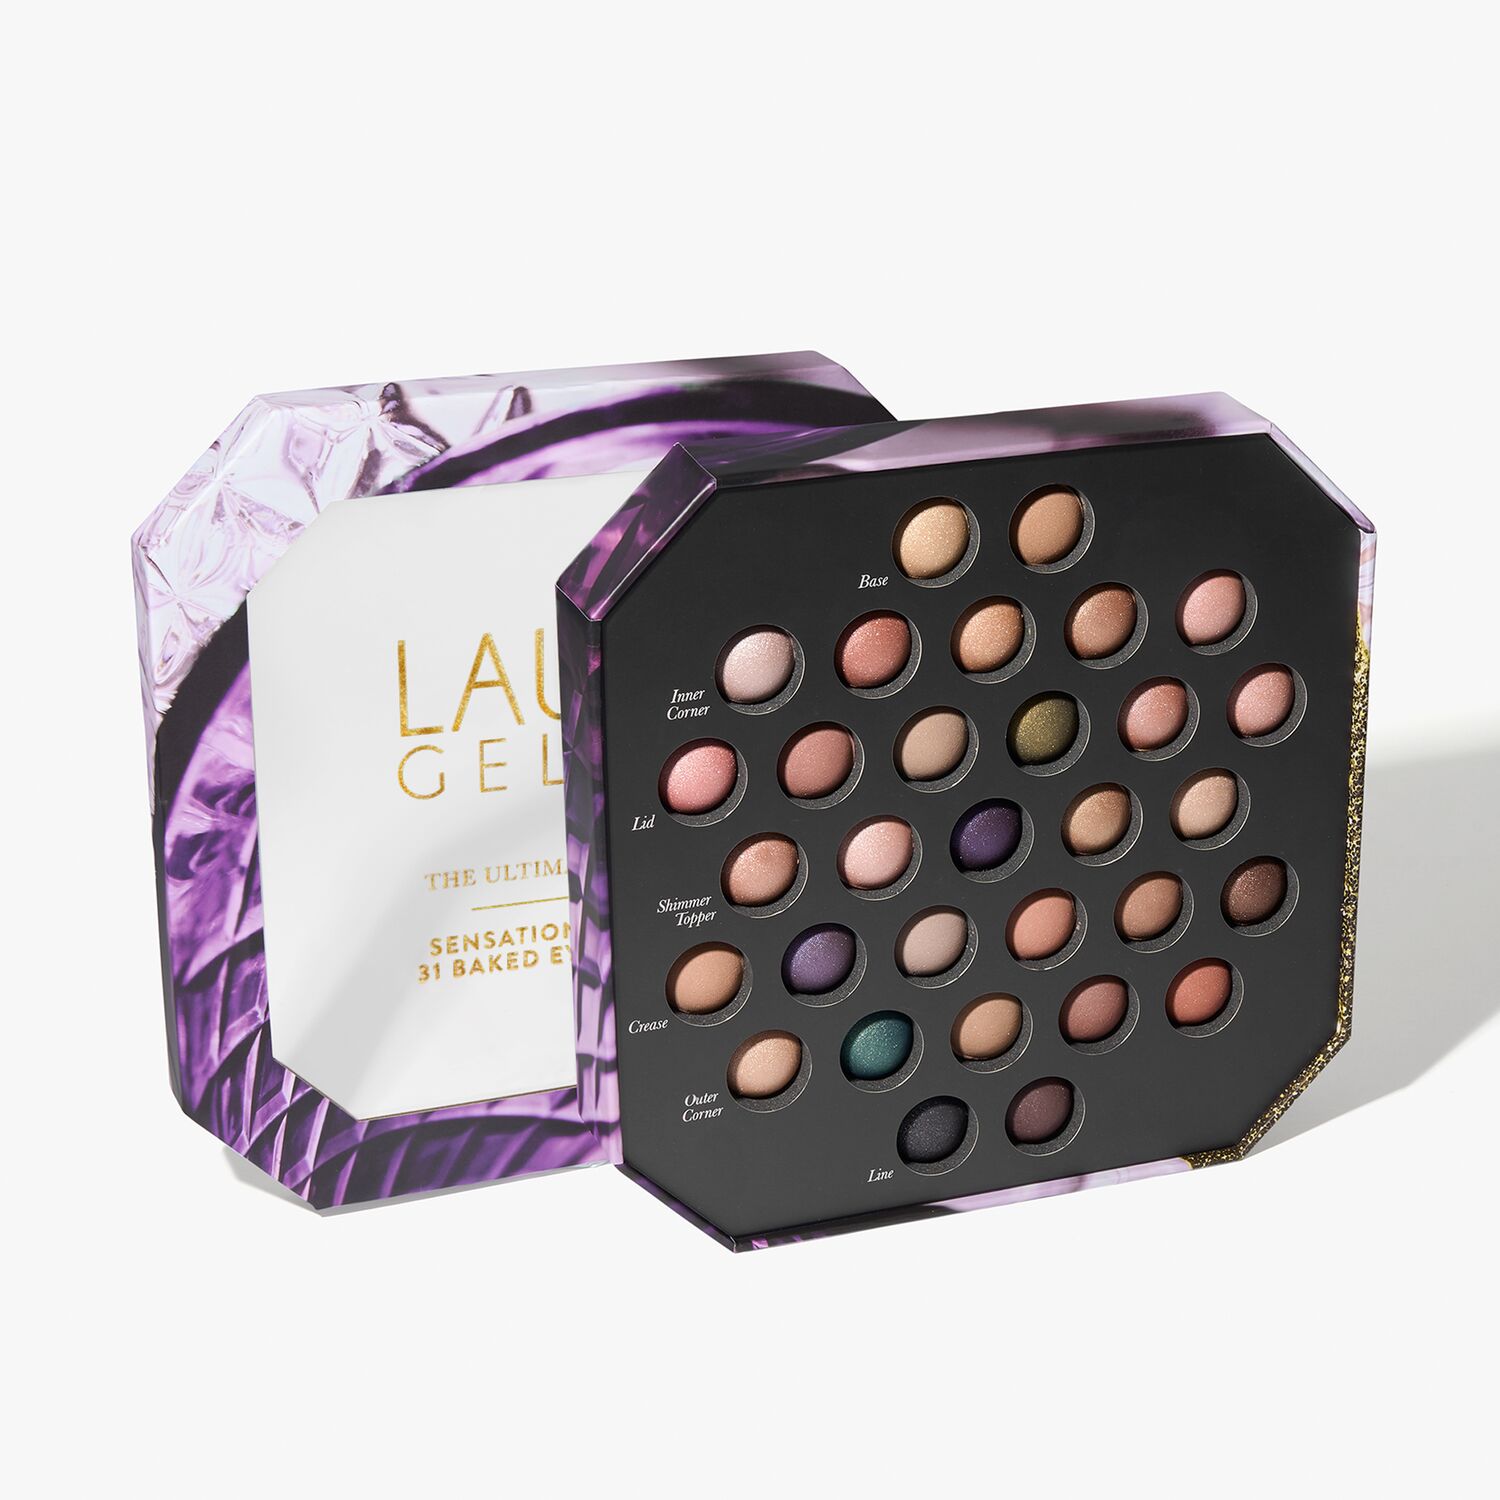 LAURA GELLER NEW YORK Annual Party in a Palette Guest of Honor Gift set  -Curated 4 Full Face Makeup Palettes- Includes eyeshadow, highlighter, and